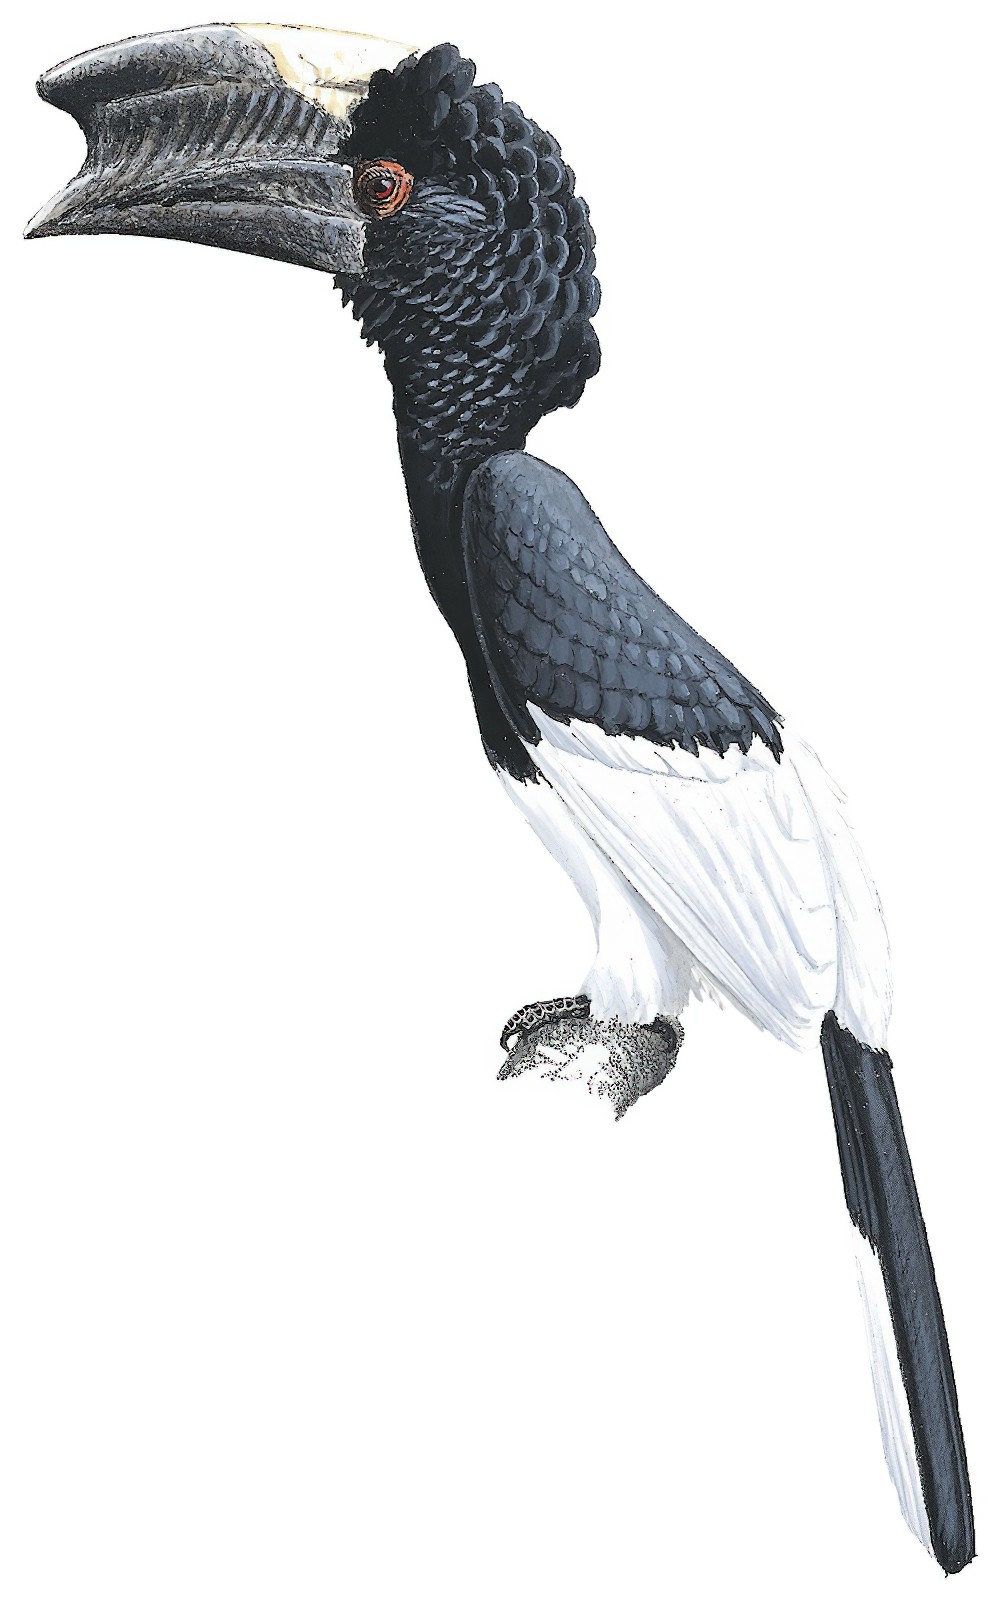 Black-and-white-casqued Hornbill / Bycanistes subcylindricus